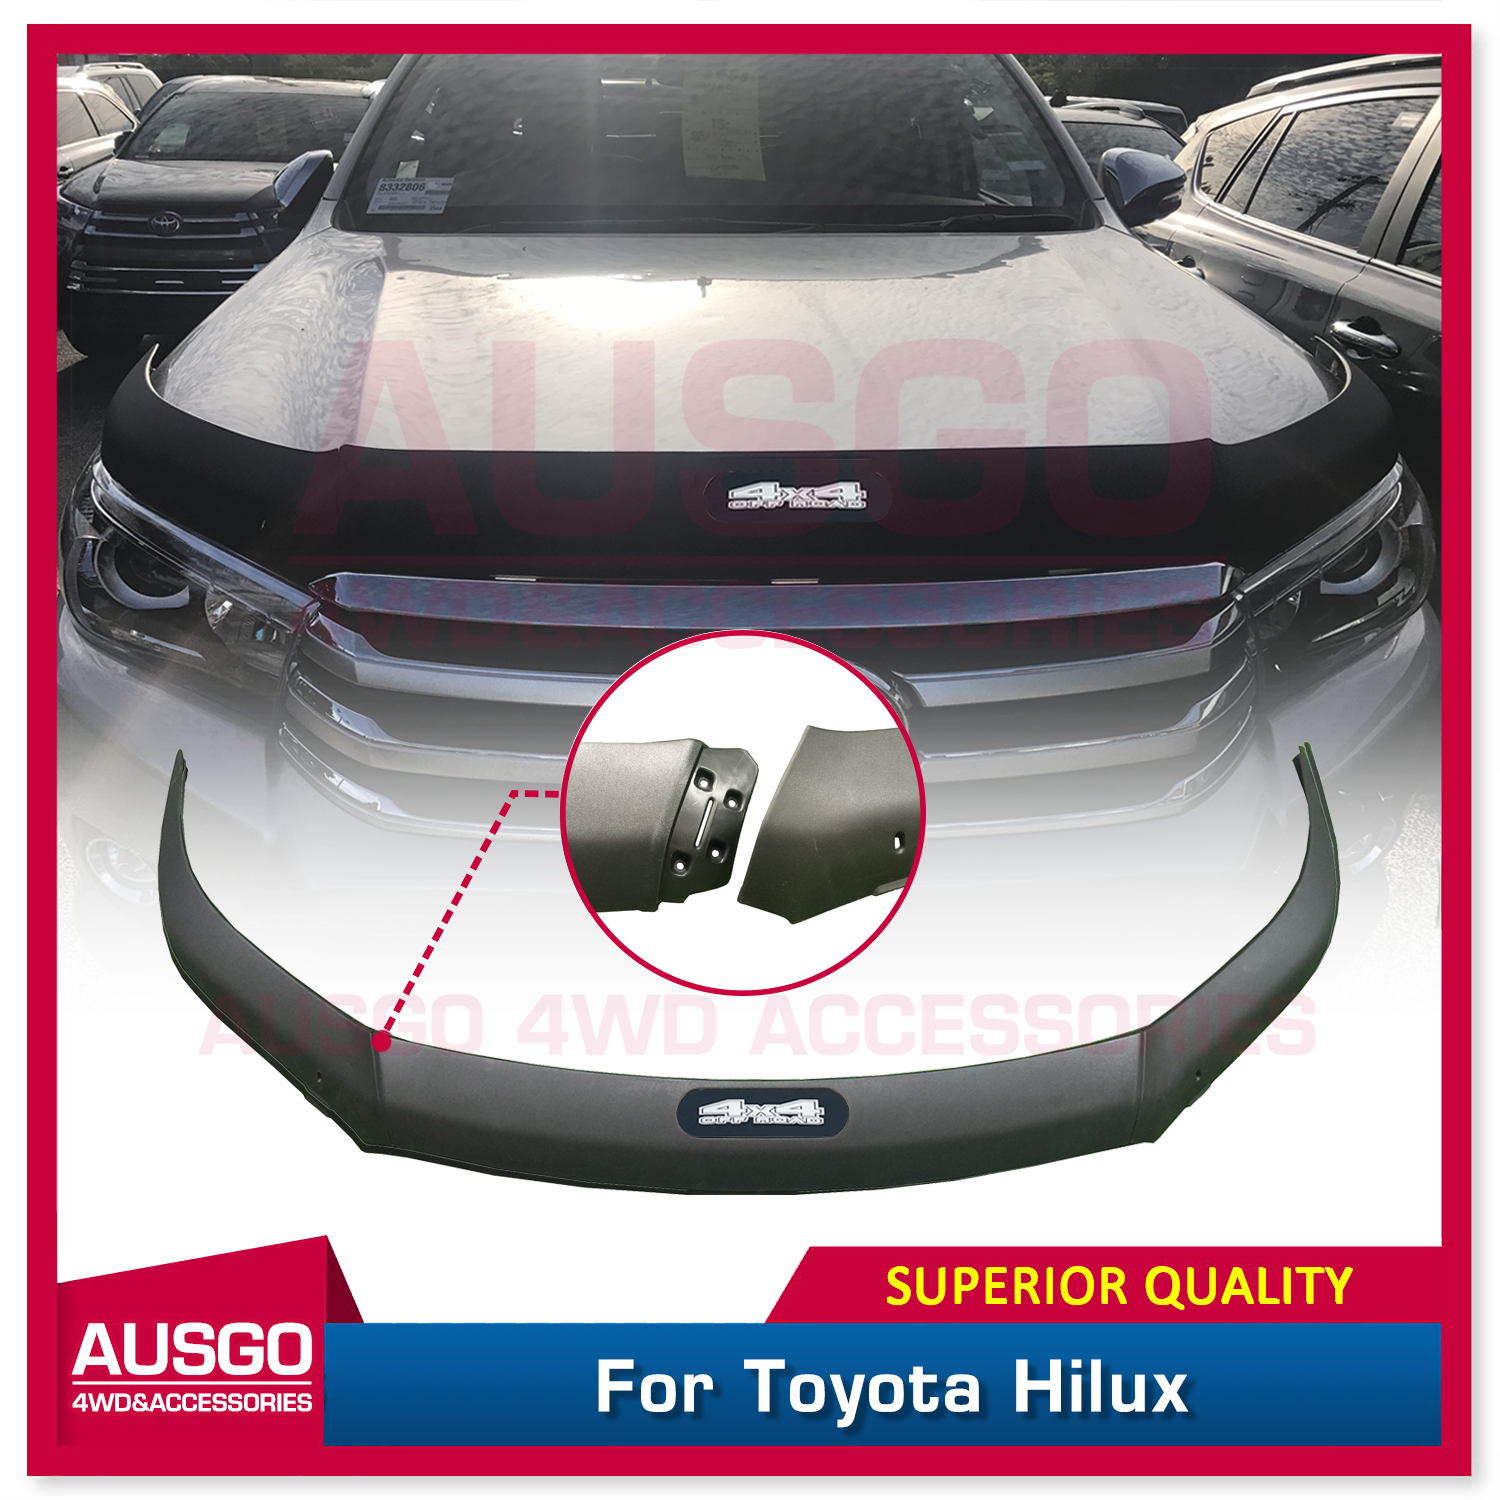 Injection Modeling Bonnet Protector Guard for Toyota Hilux 2015-2020